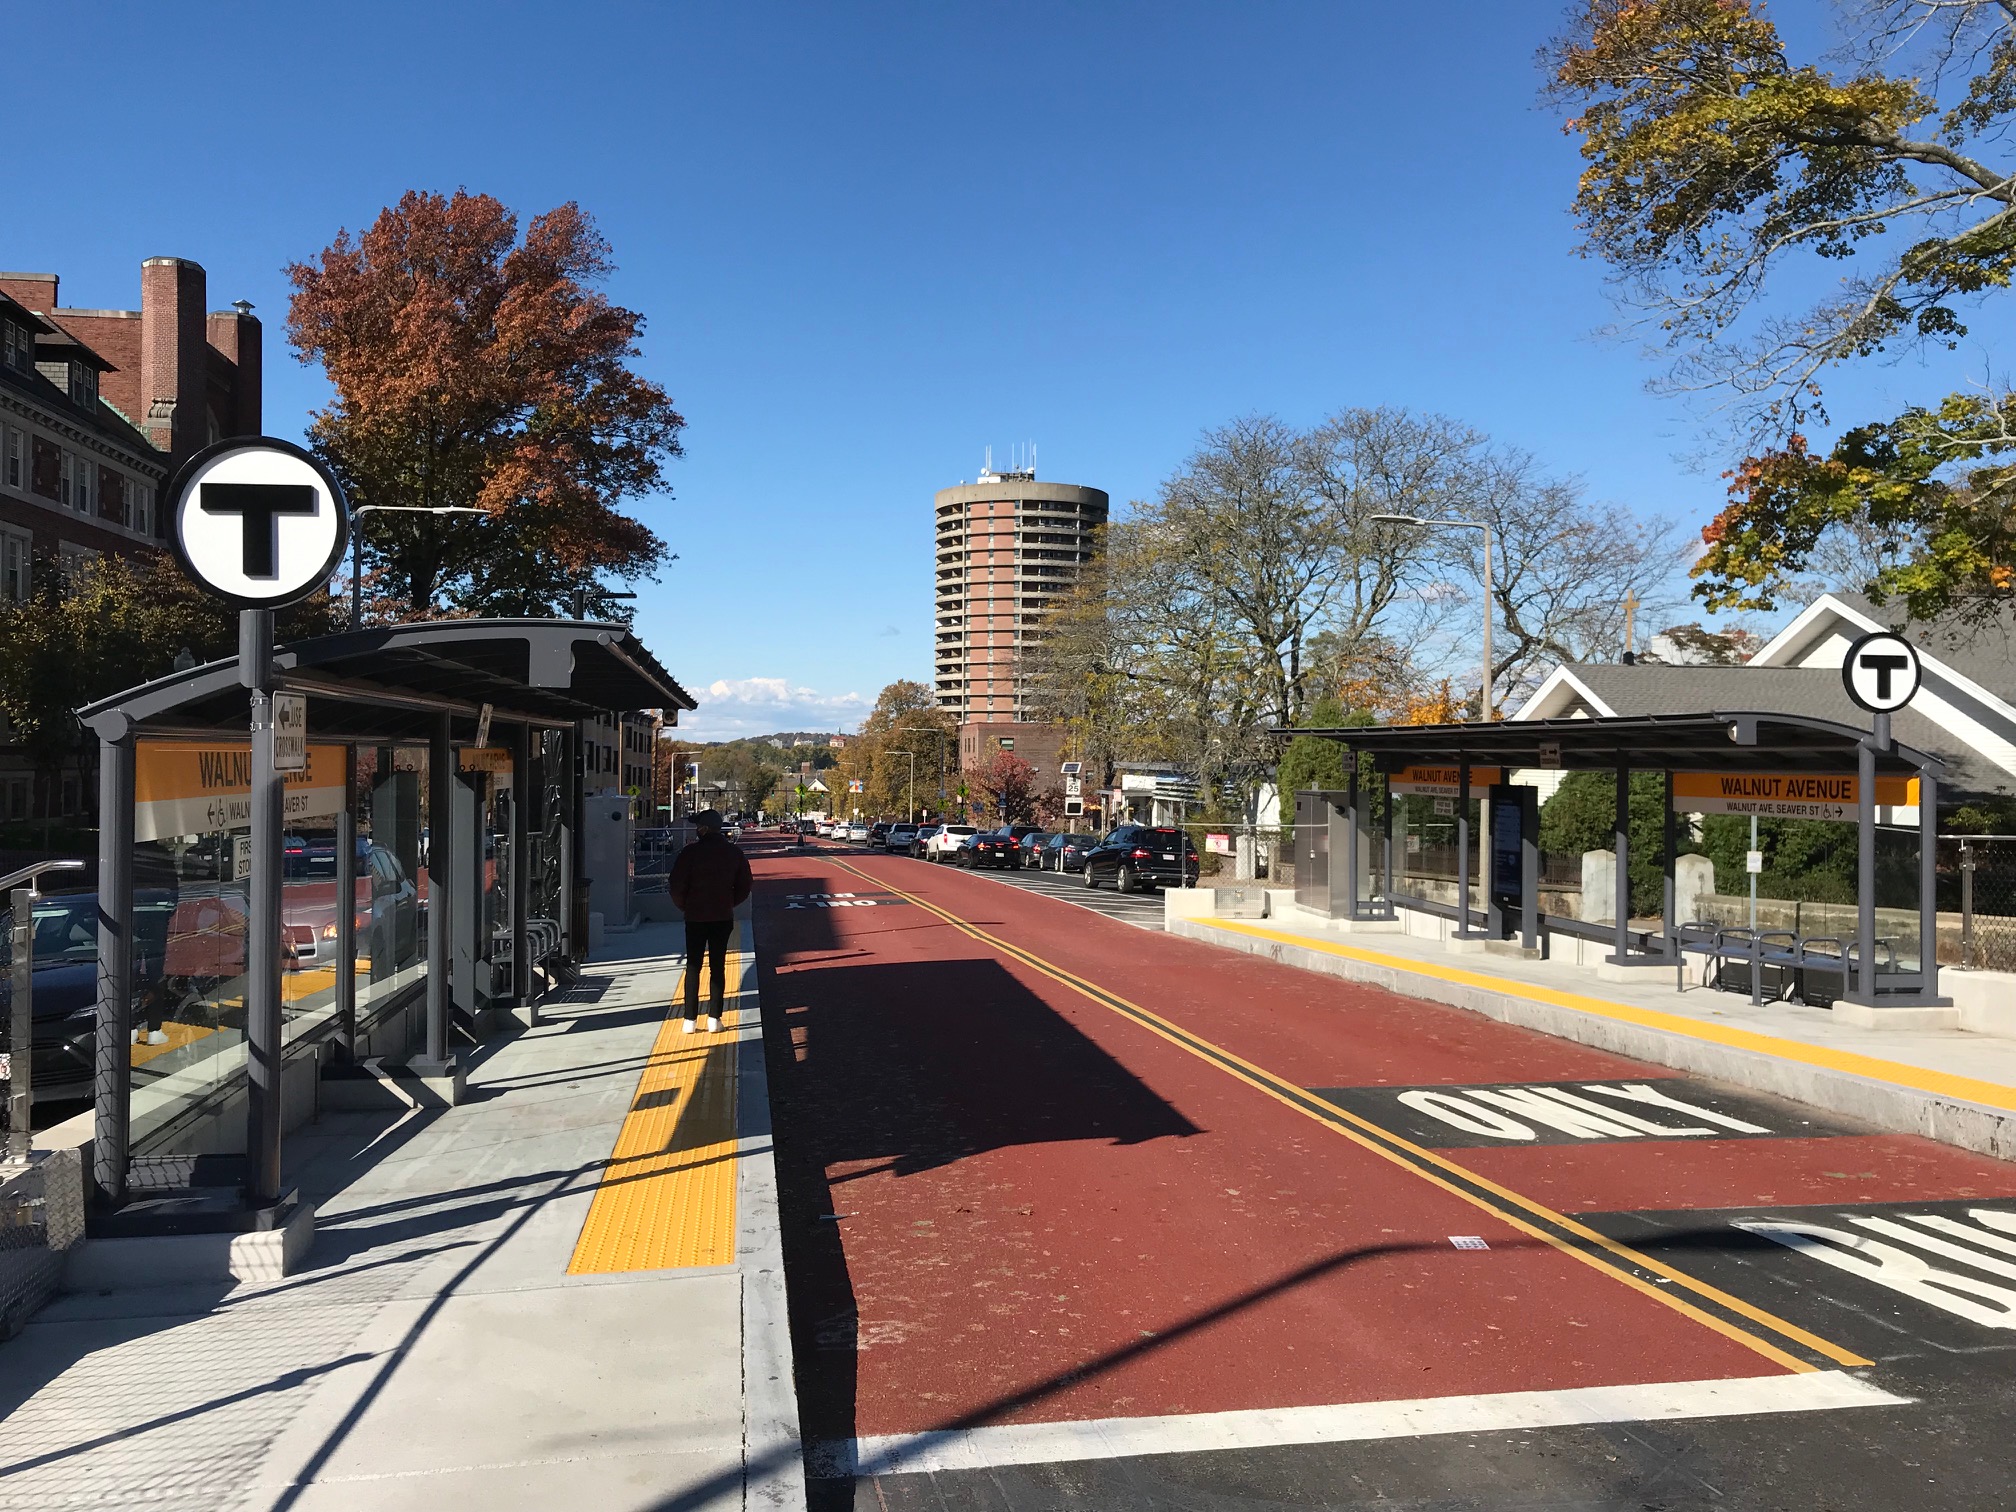 A view of the new Columbus Ave. bus lanes and the new bus platforms at Walnut Avenue.